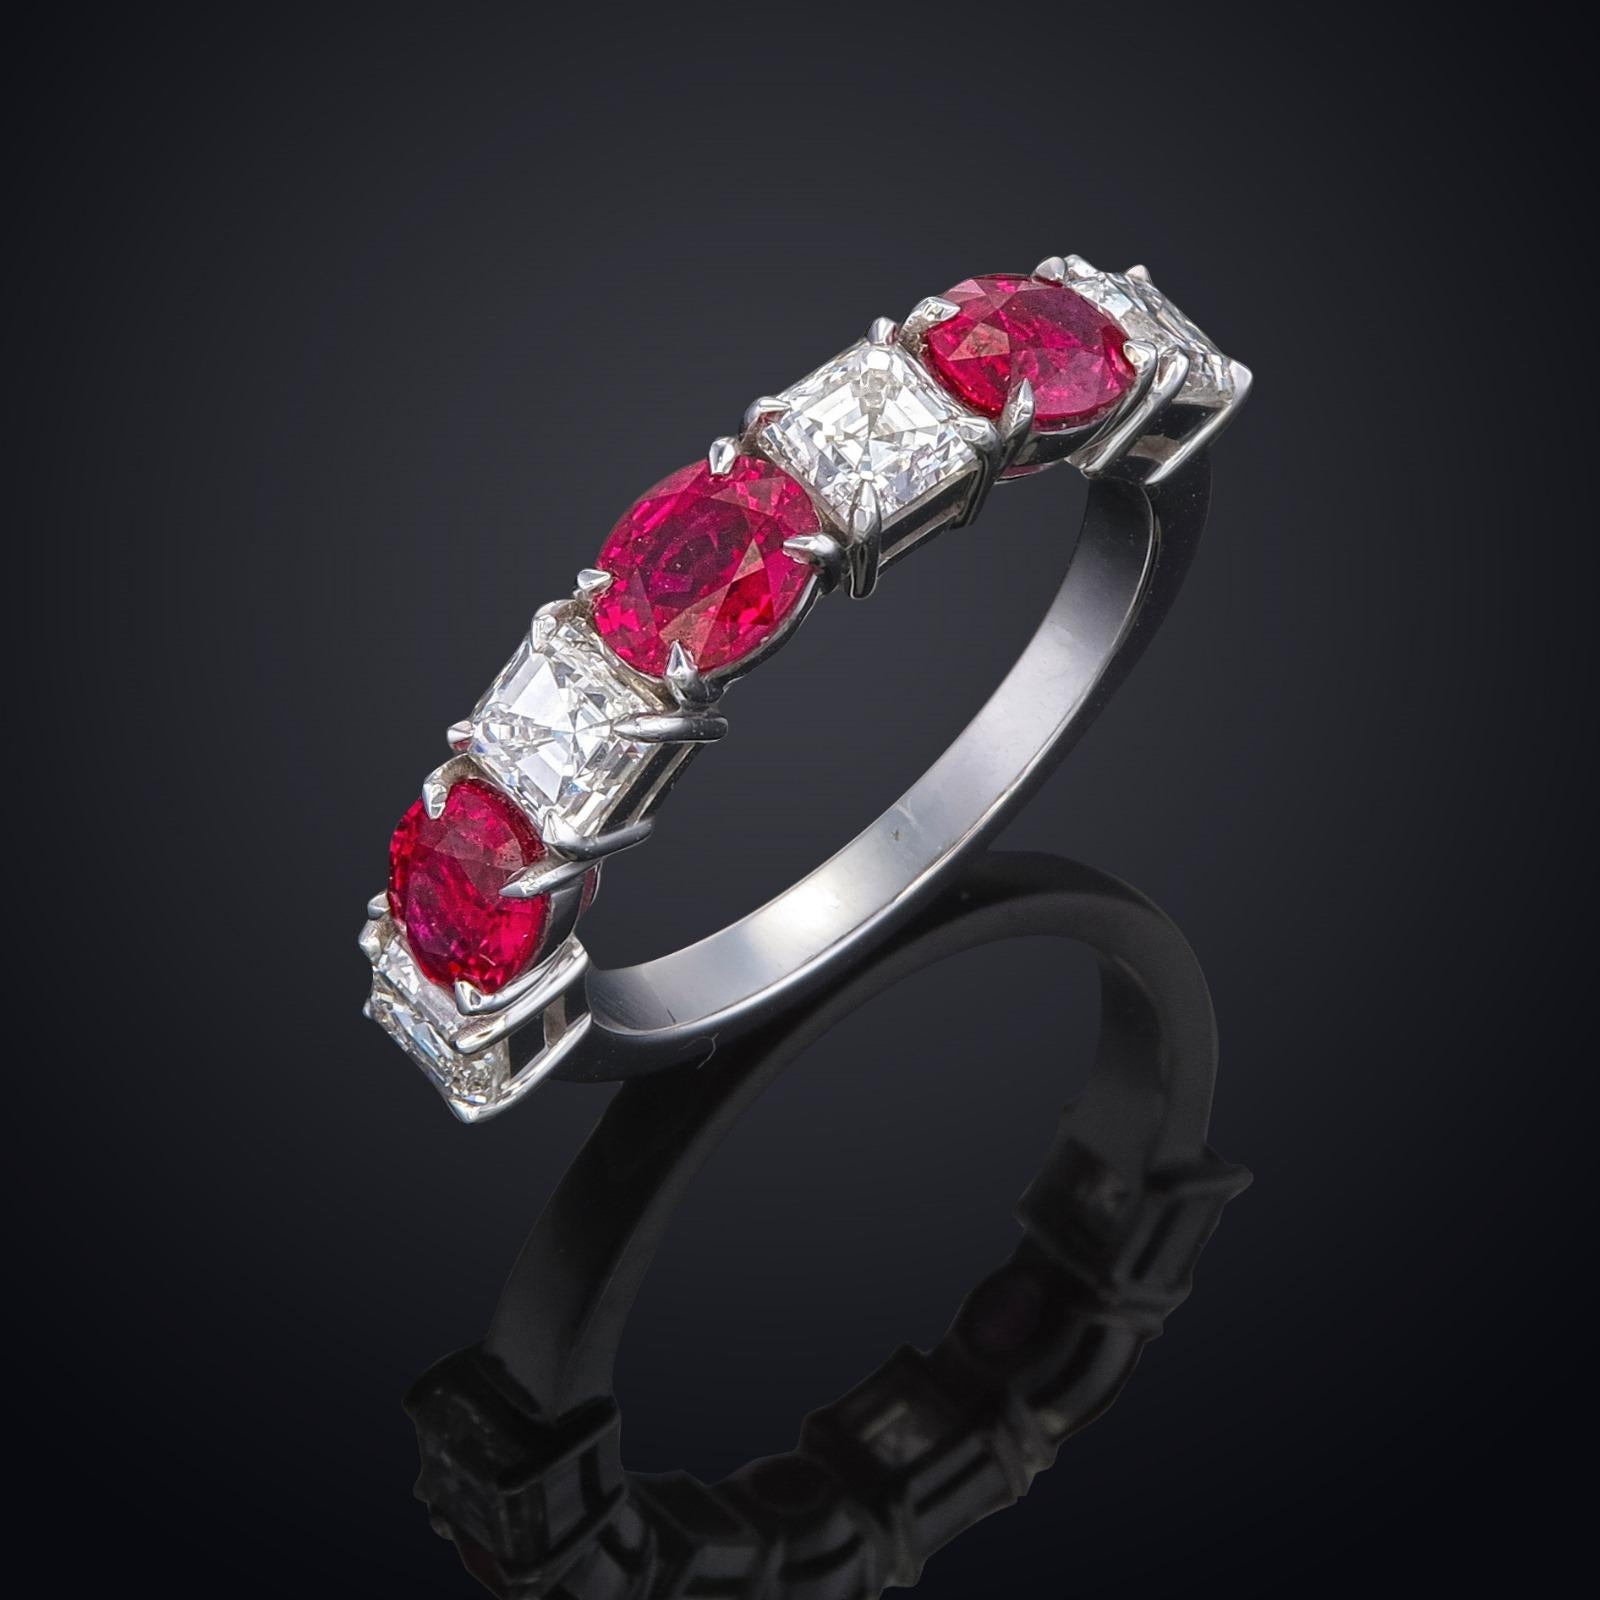 **100% NATURAL FANCY COLOUR DIAMOND JEWELRY**

✪ Jewelry Details ✪

OVAL BURMA RUBY H- 3/1.70CT

ASCHER FG VVS-VS -4/1.60CT

♦ GROSS WEIGHT: 3.749grams

➛ Metal Type: 18k Gold
➛ Jewelry Type: Fashion ring, Bridal